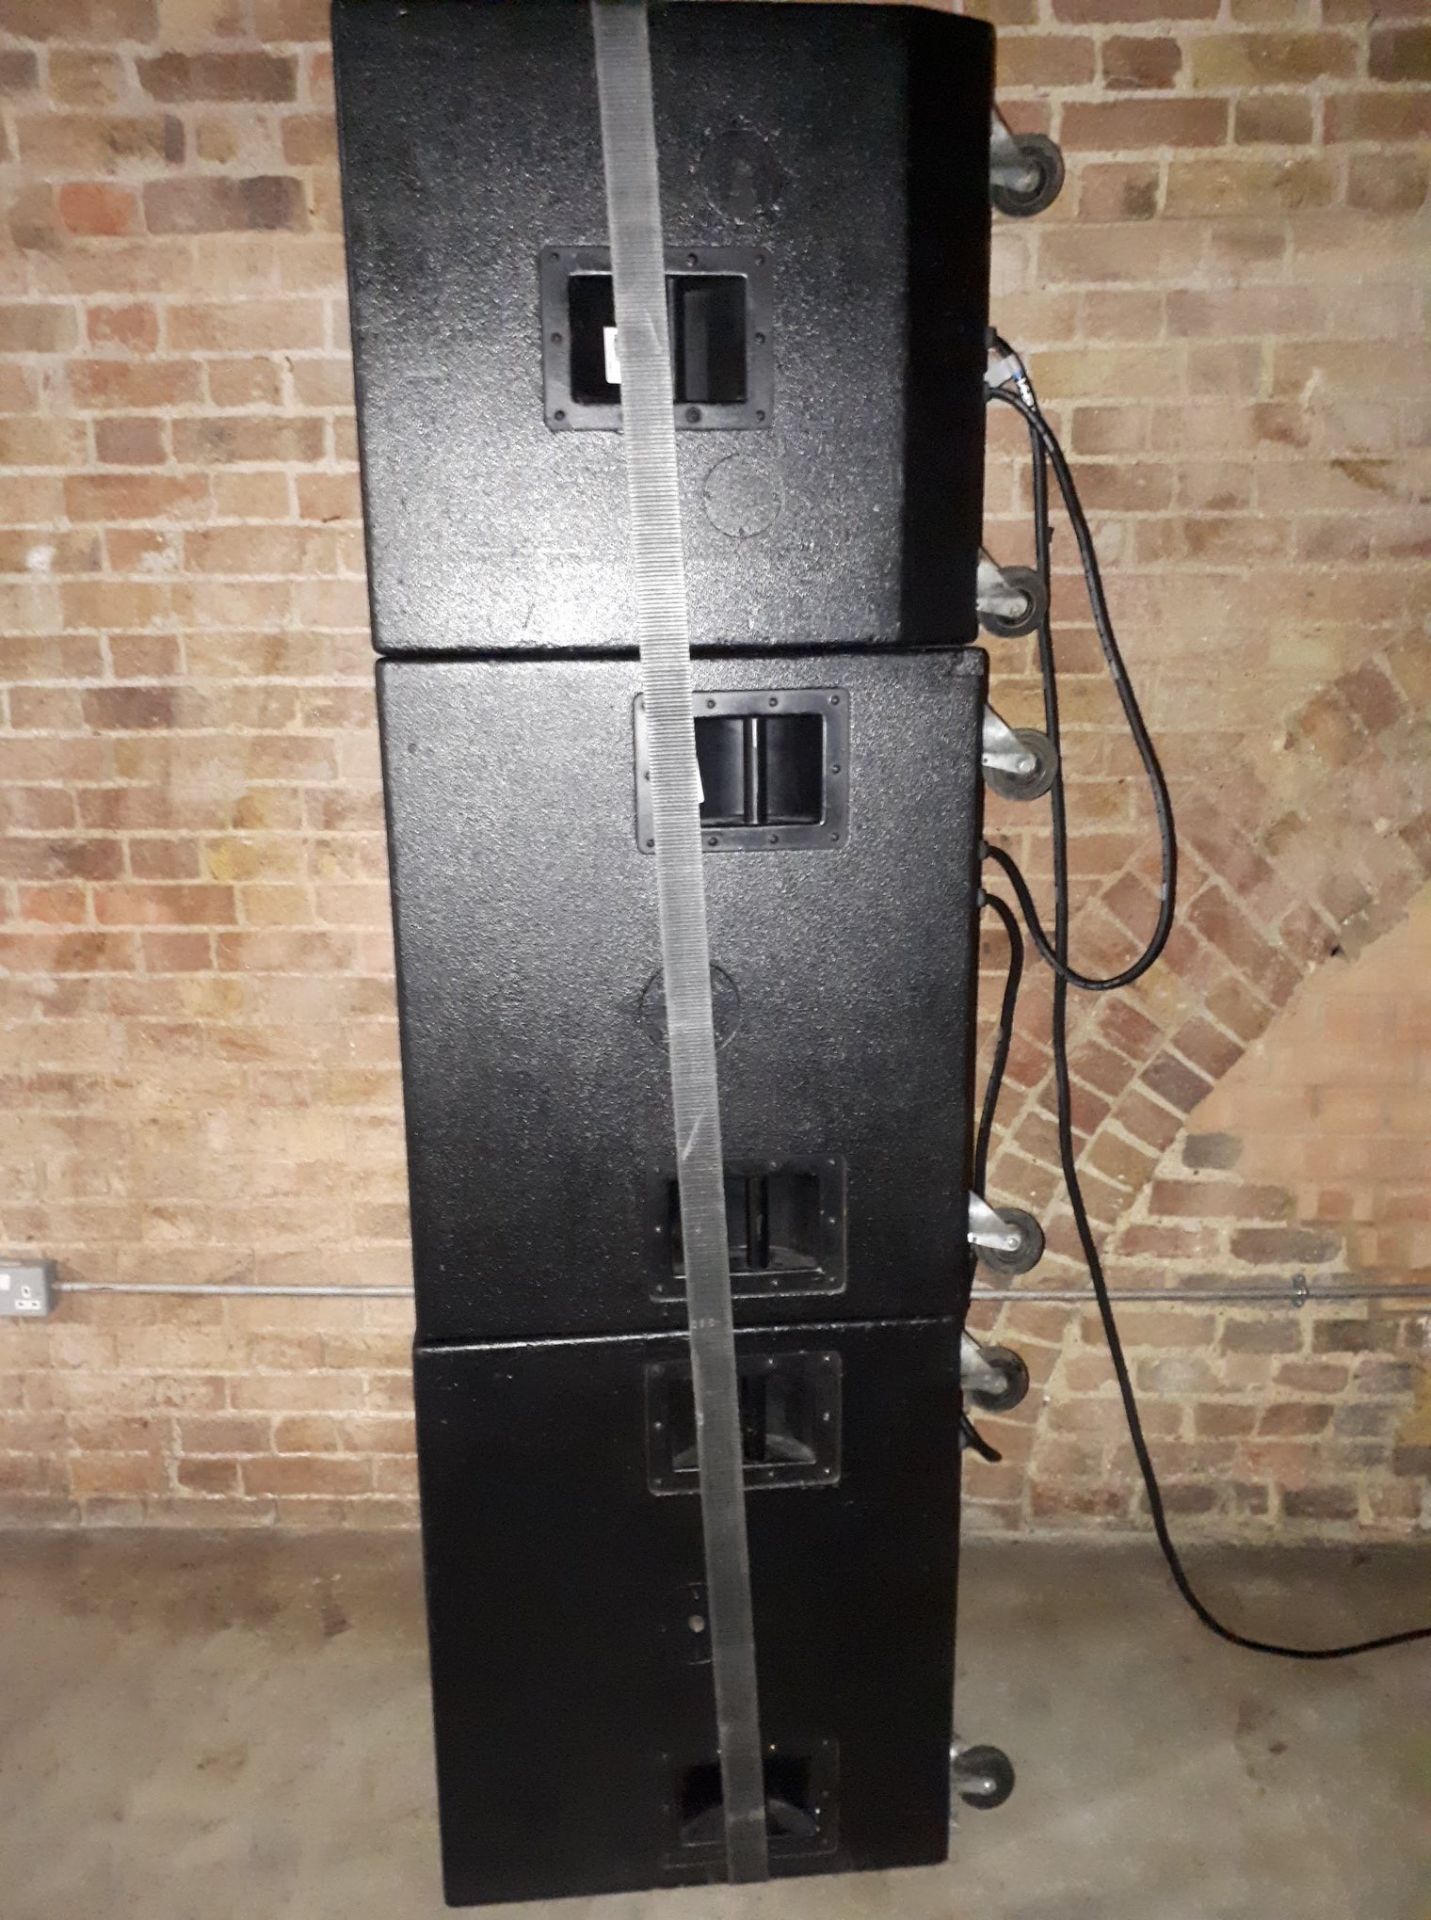 D and B Audiotechnik C7 Series Sound System with D12 Amplifiers, Racks and Cabling - Image 7 of 7